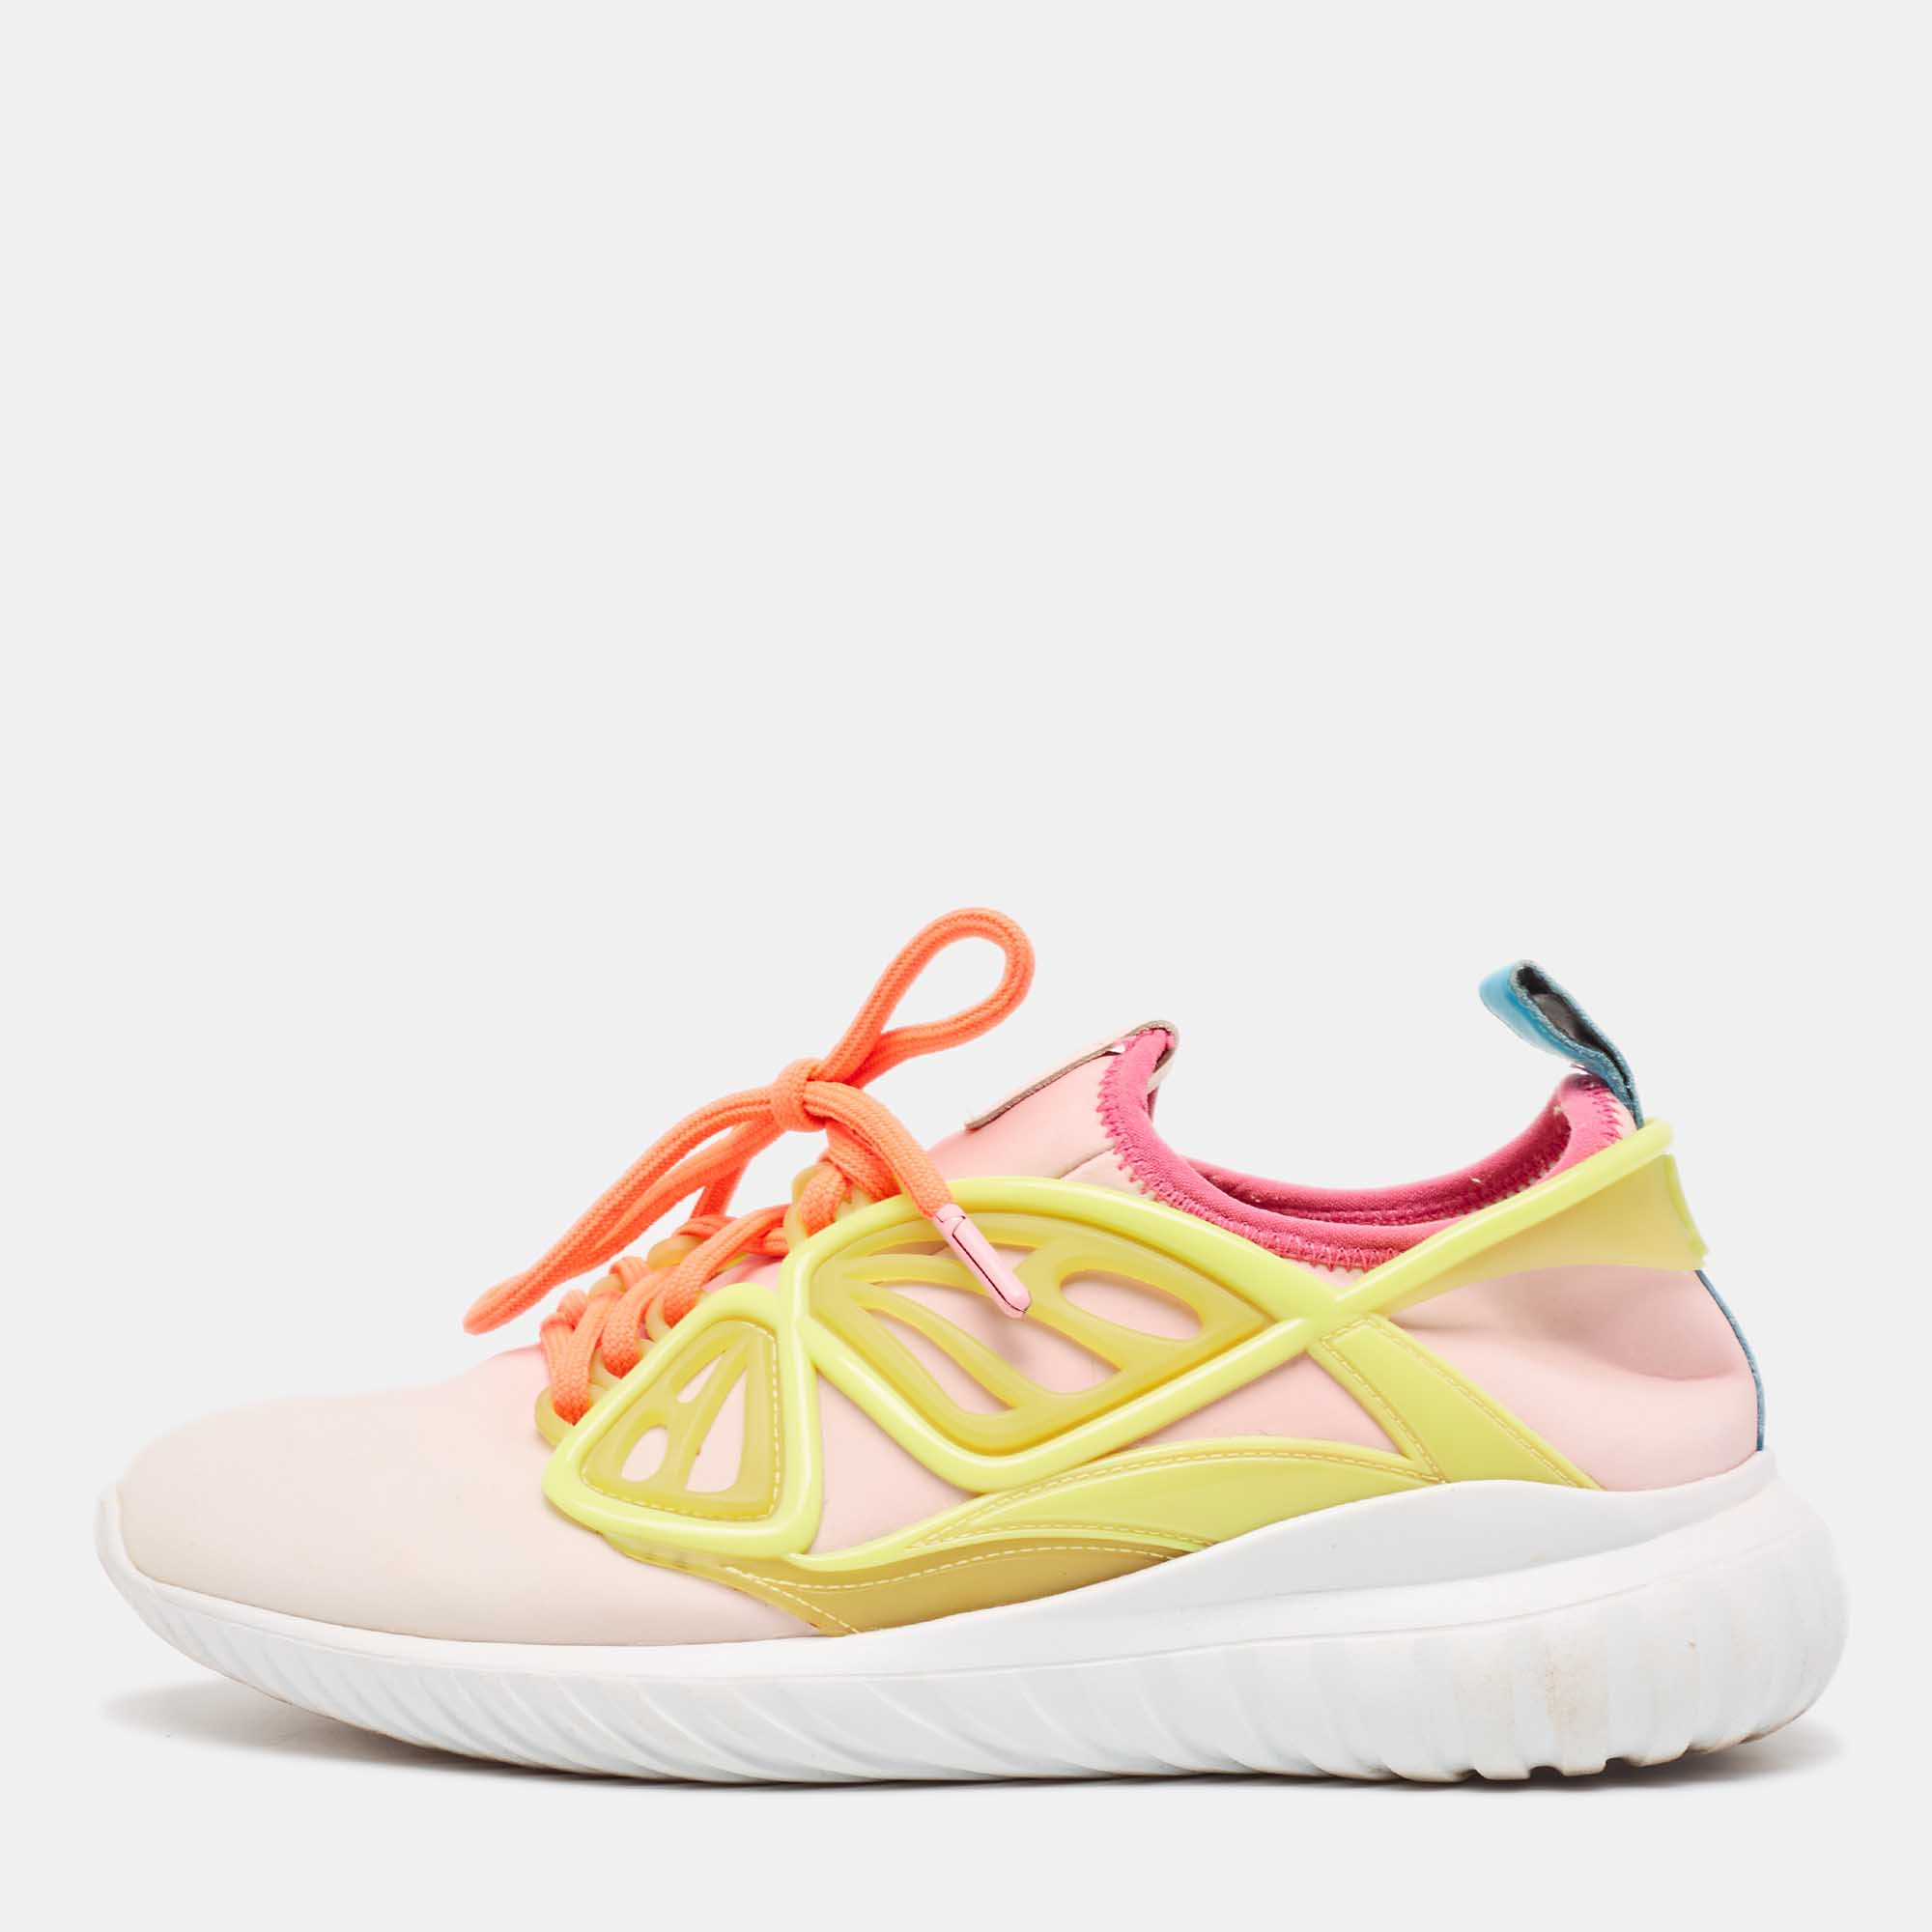 Sophia webster multicolor nylon lace up sneakers size 38